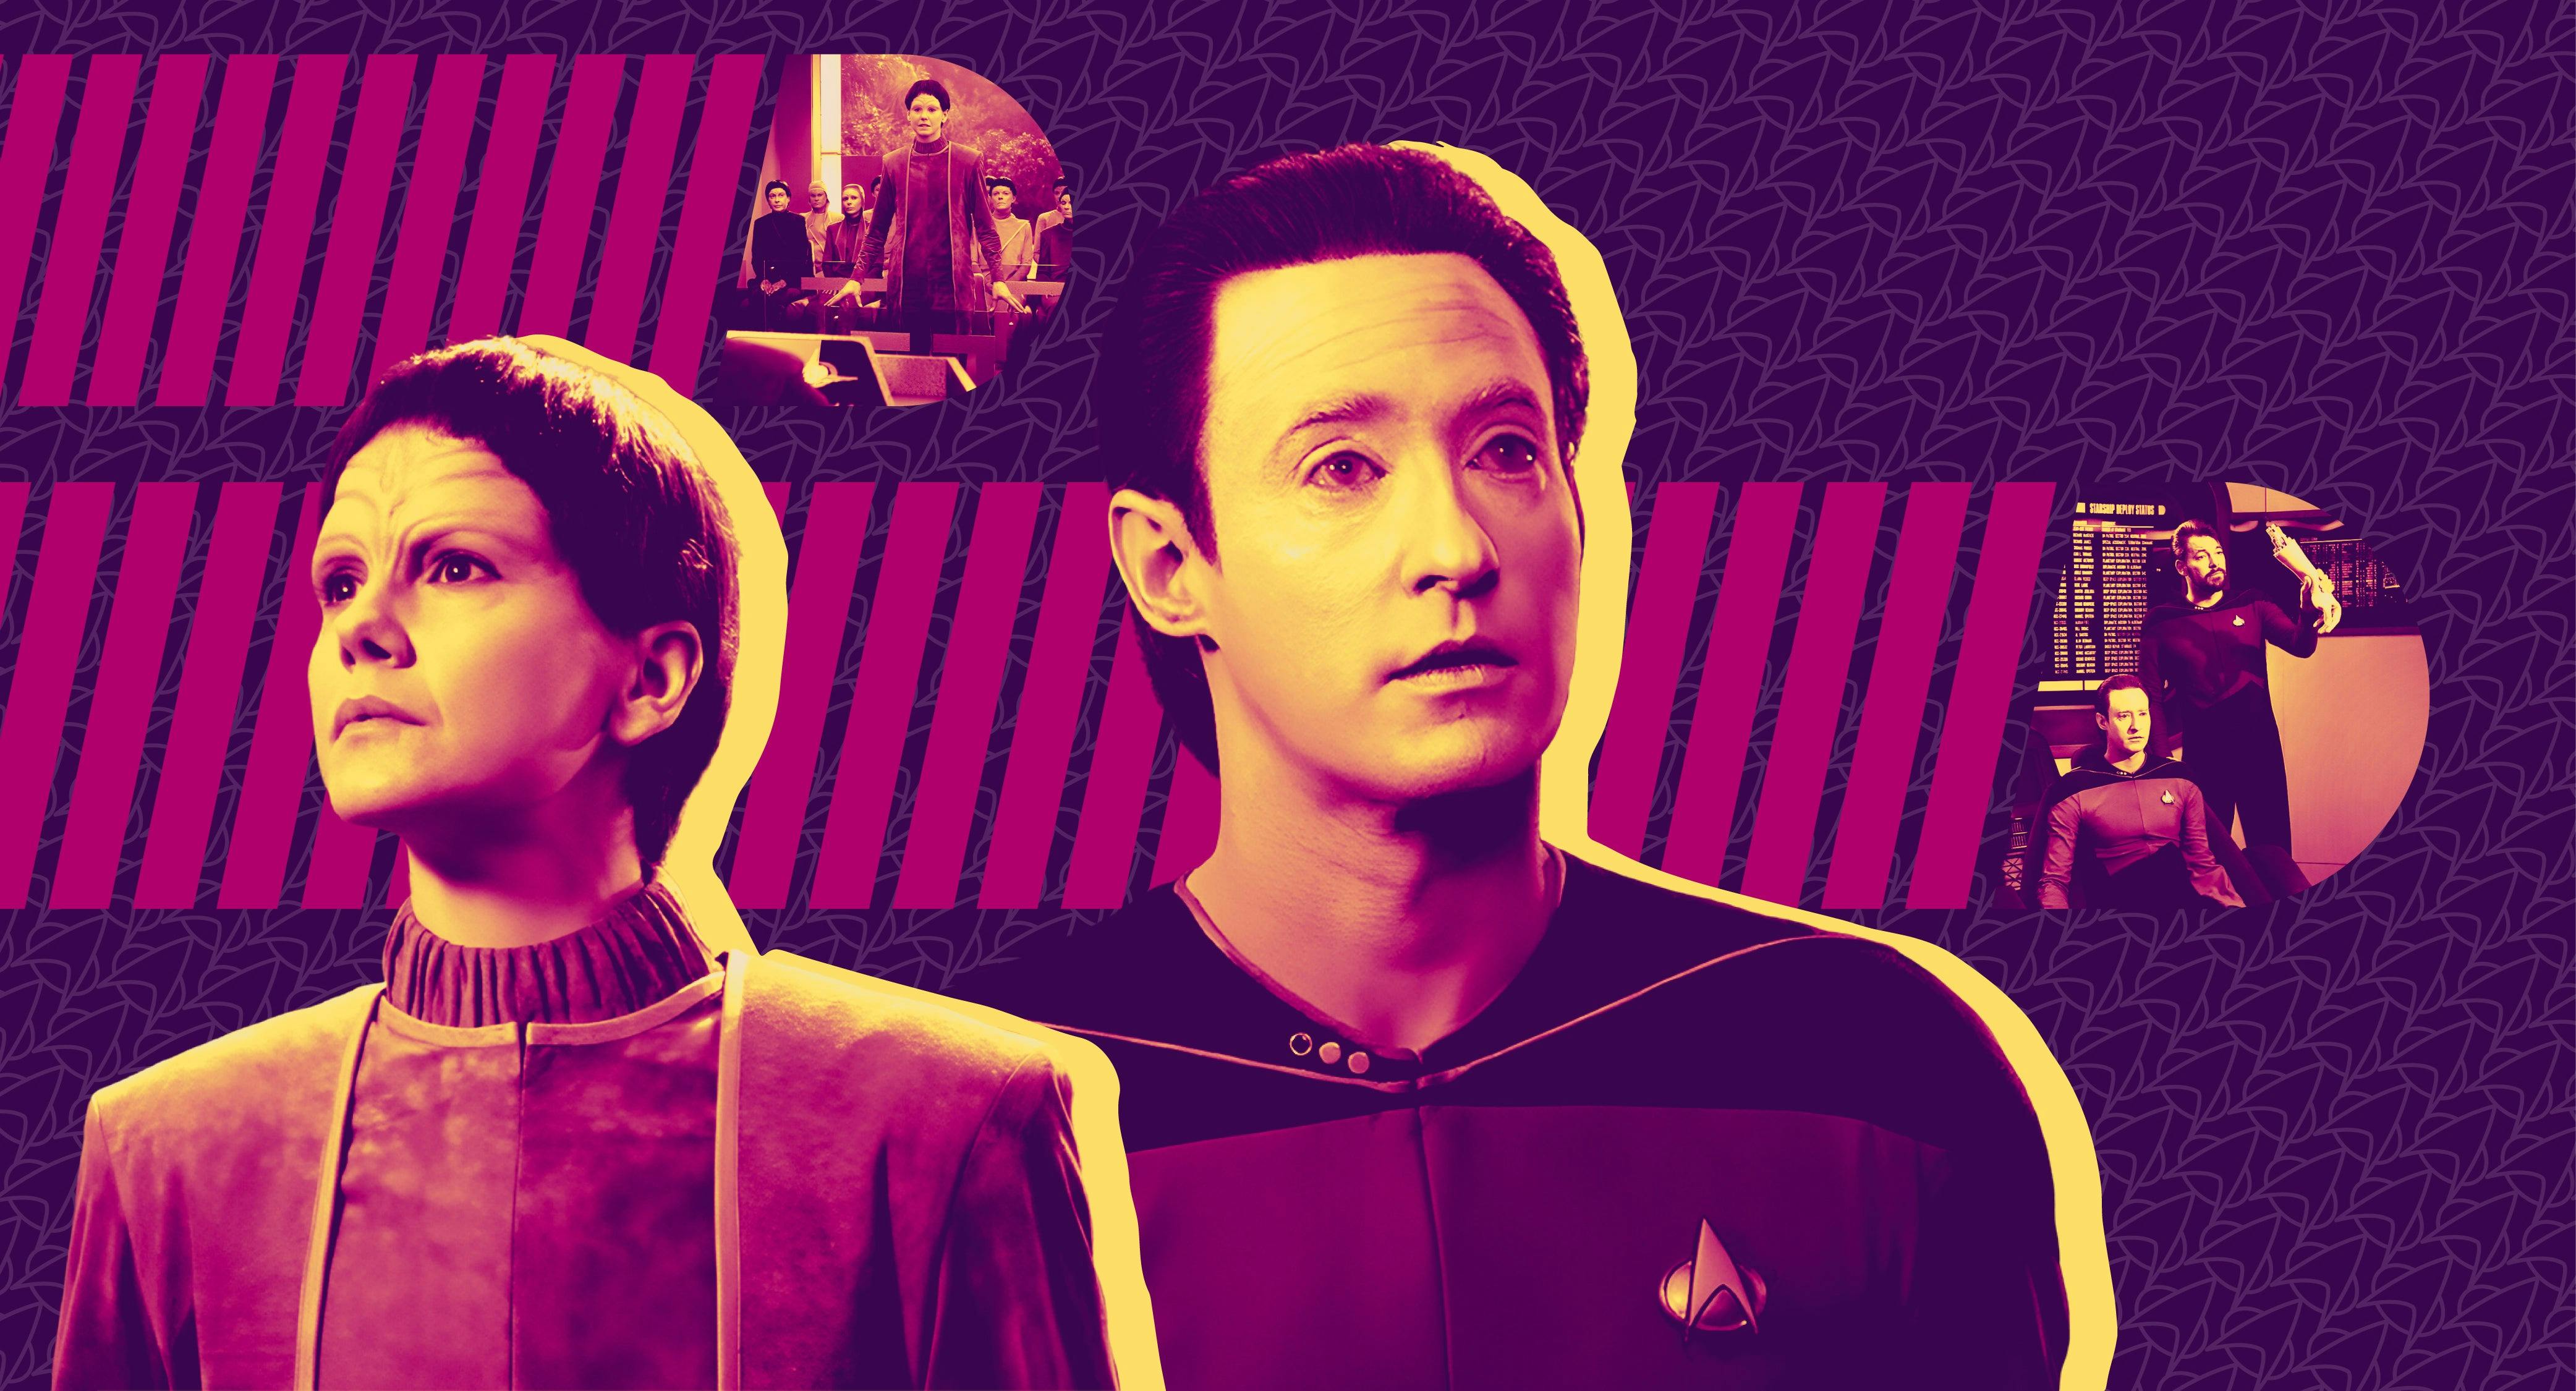 Two photos of Data and Soren (from the episode "The Outcast") are next to each other against a purple background.